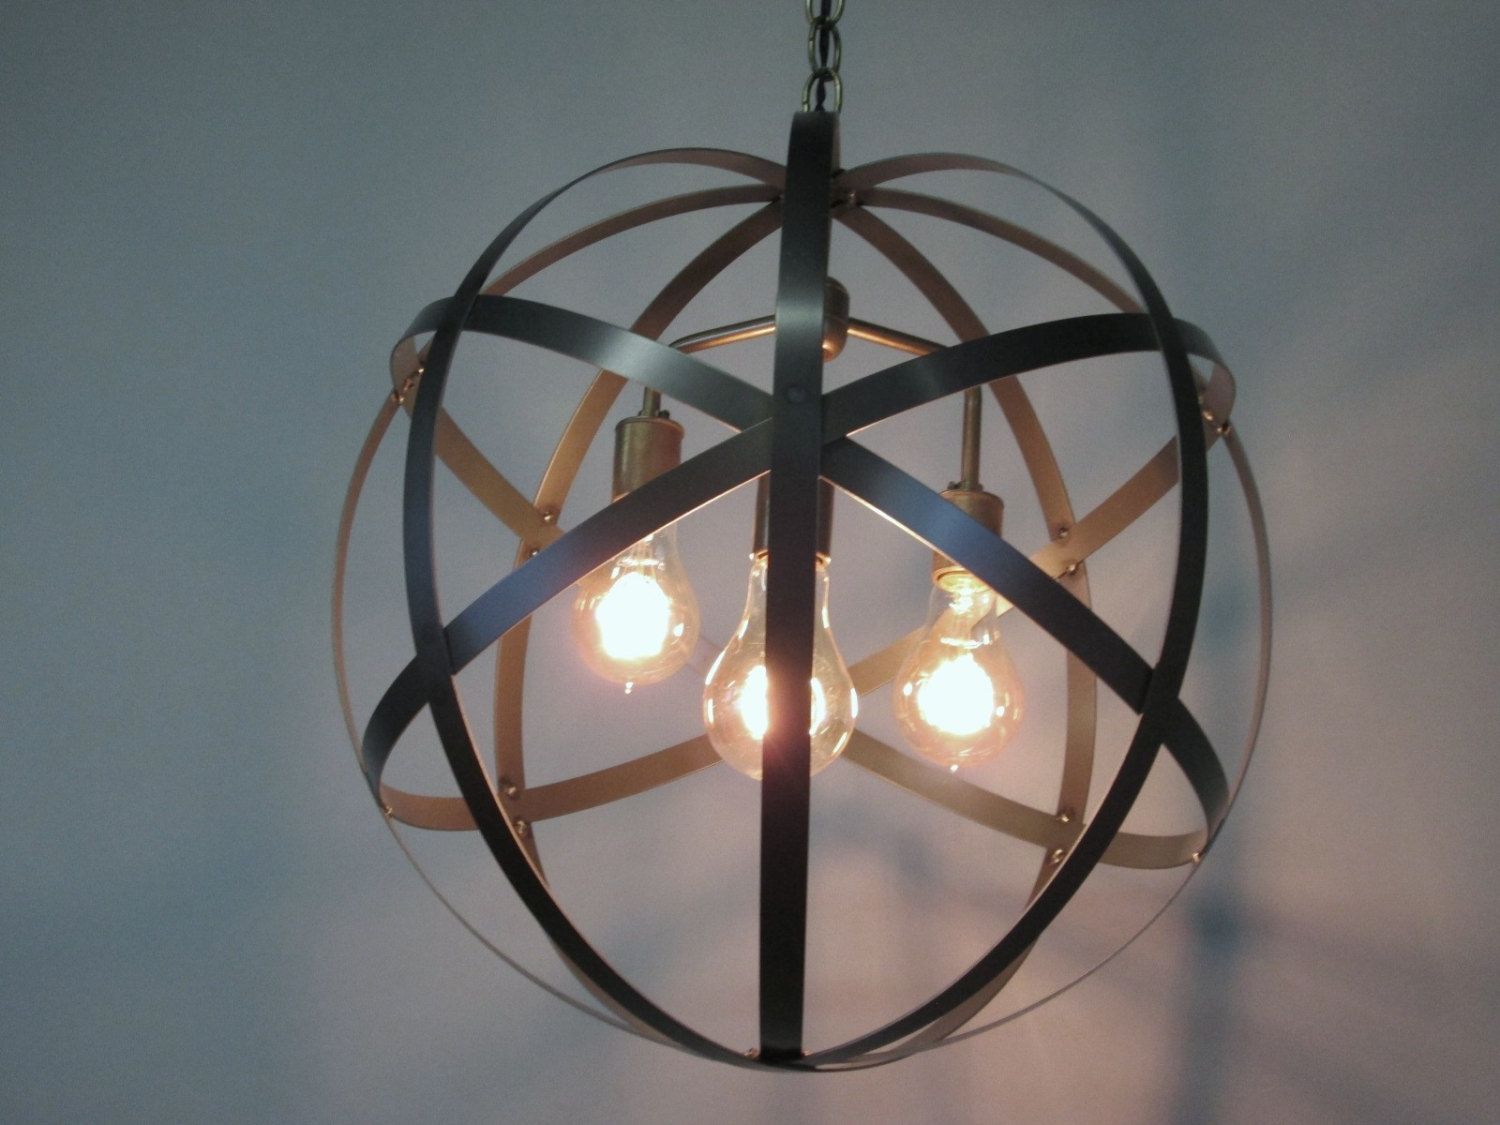 Orb Chandelier Etsy Intended For Orb Chandelier (View 9 of 12)